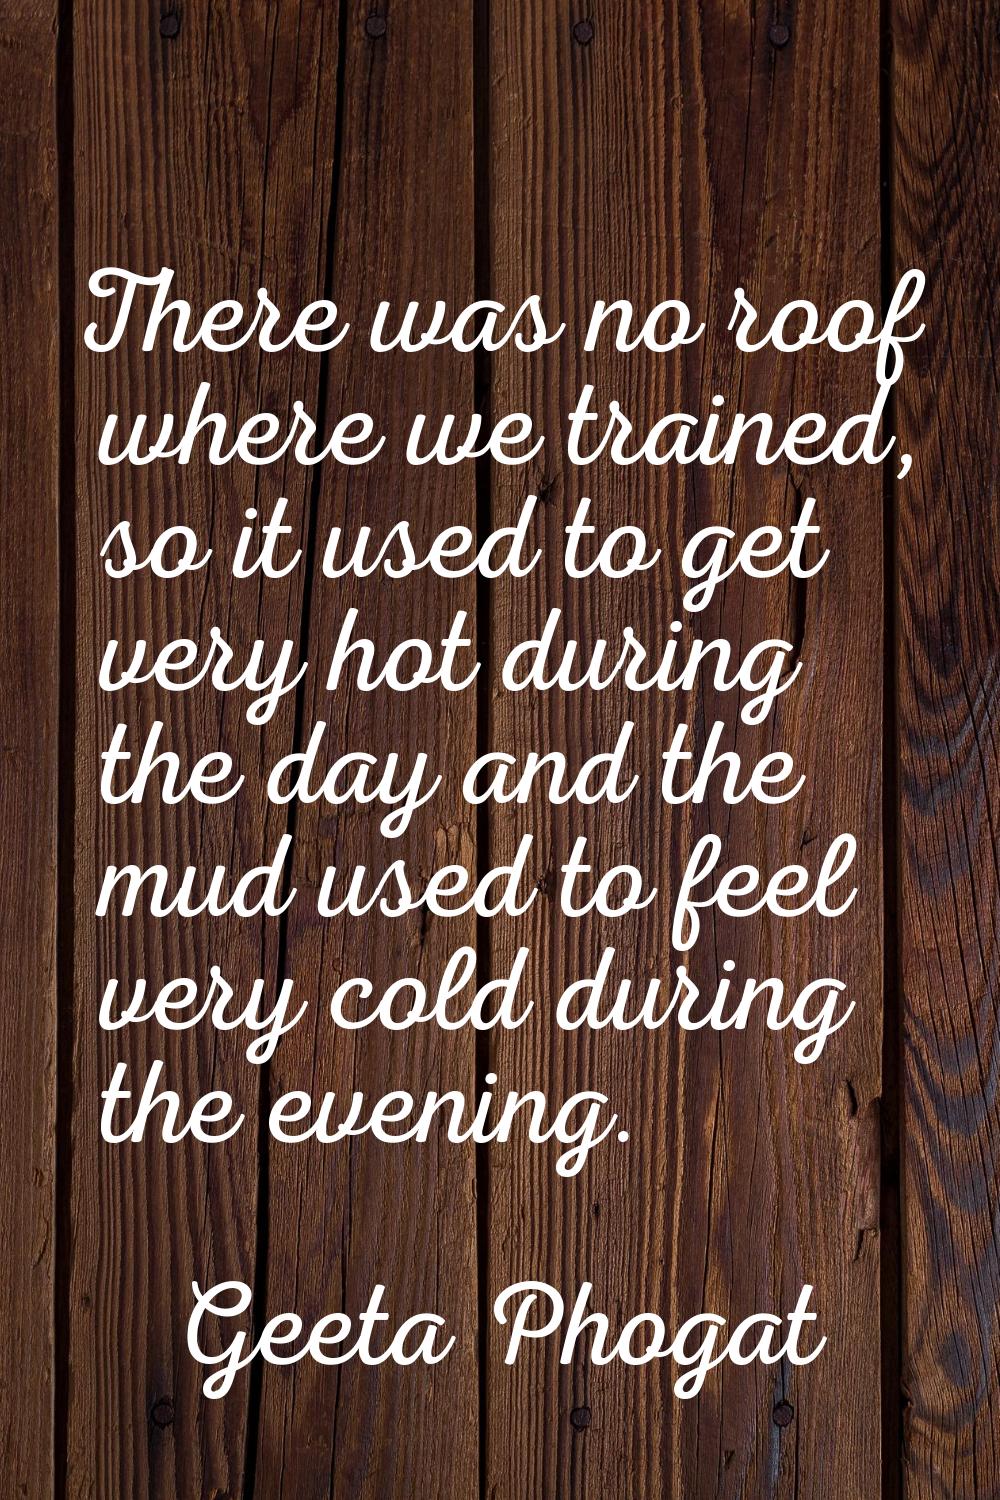 There was no roof where we trained, so it used to get very hot during the day and the mud used to f